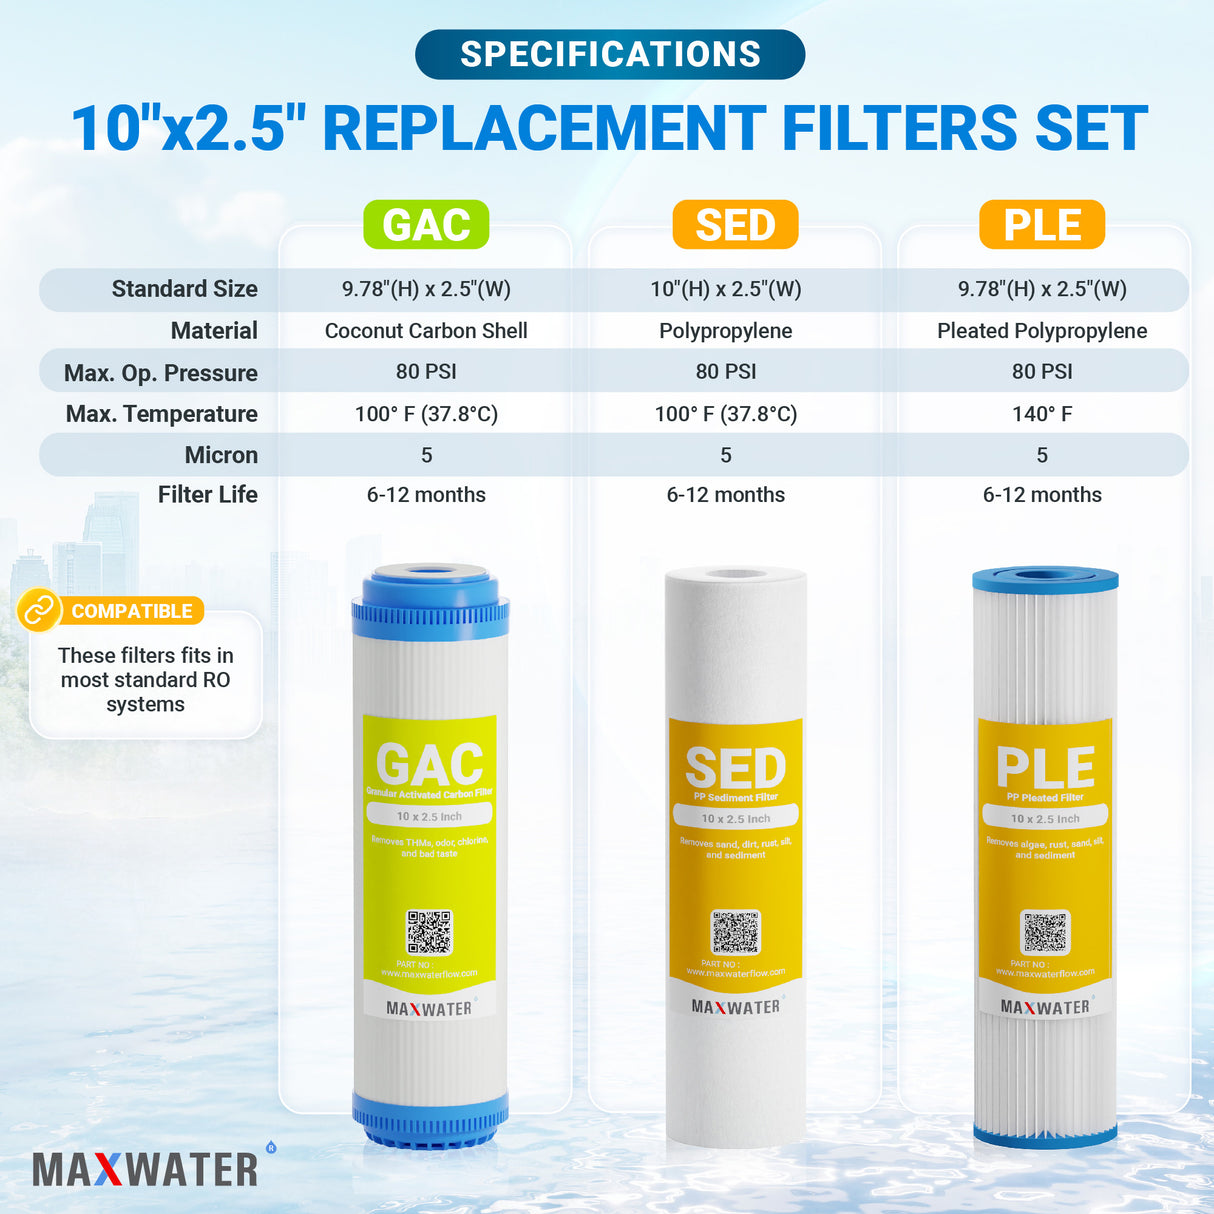 Enhanced filtration with pleated sediment and GAC filter replacement cartridge